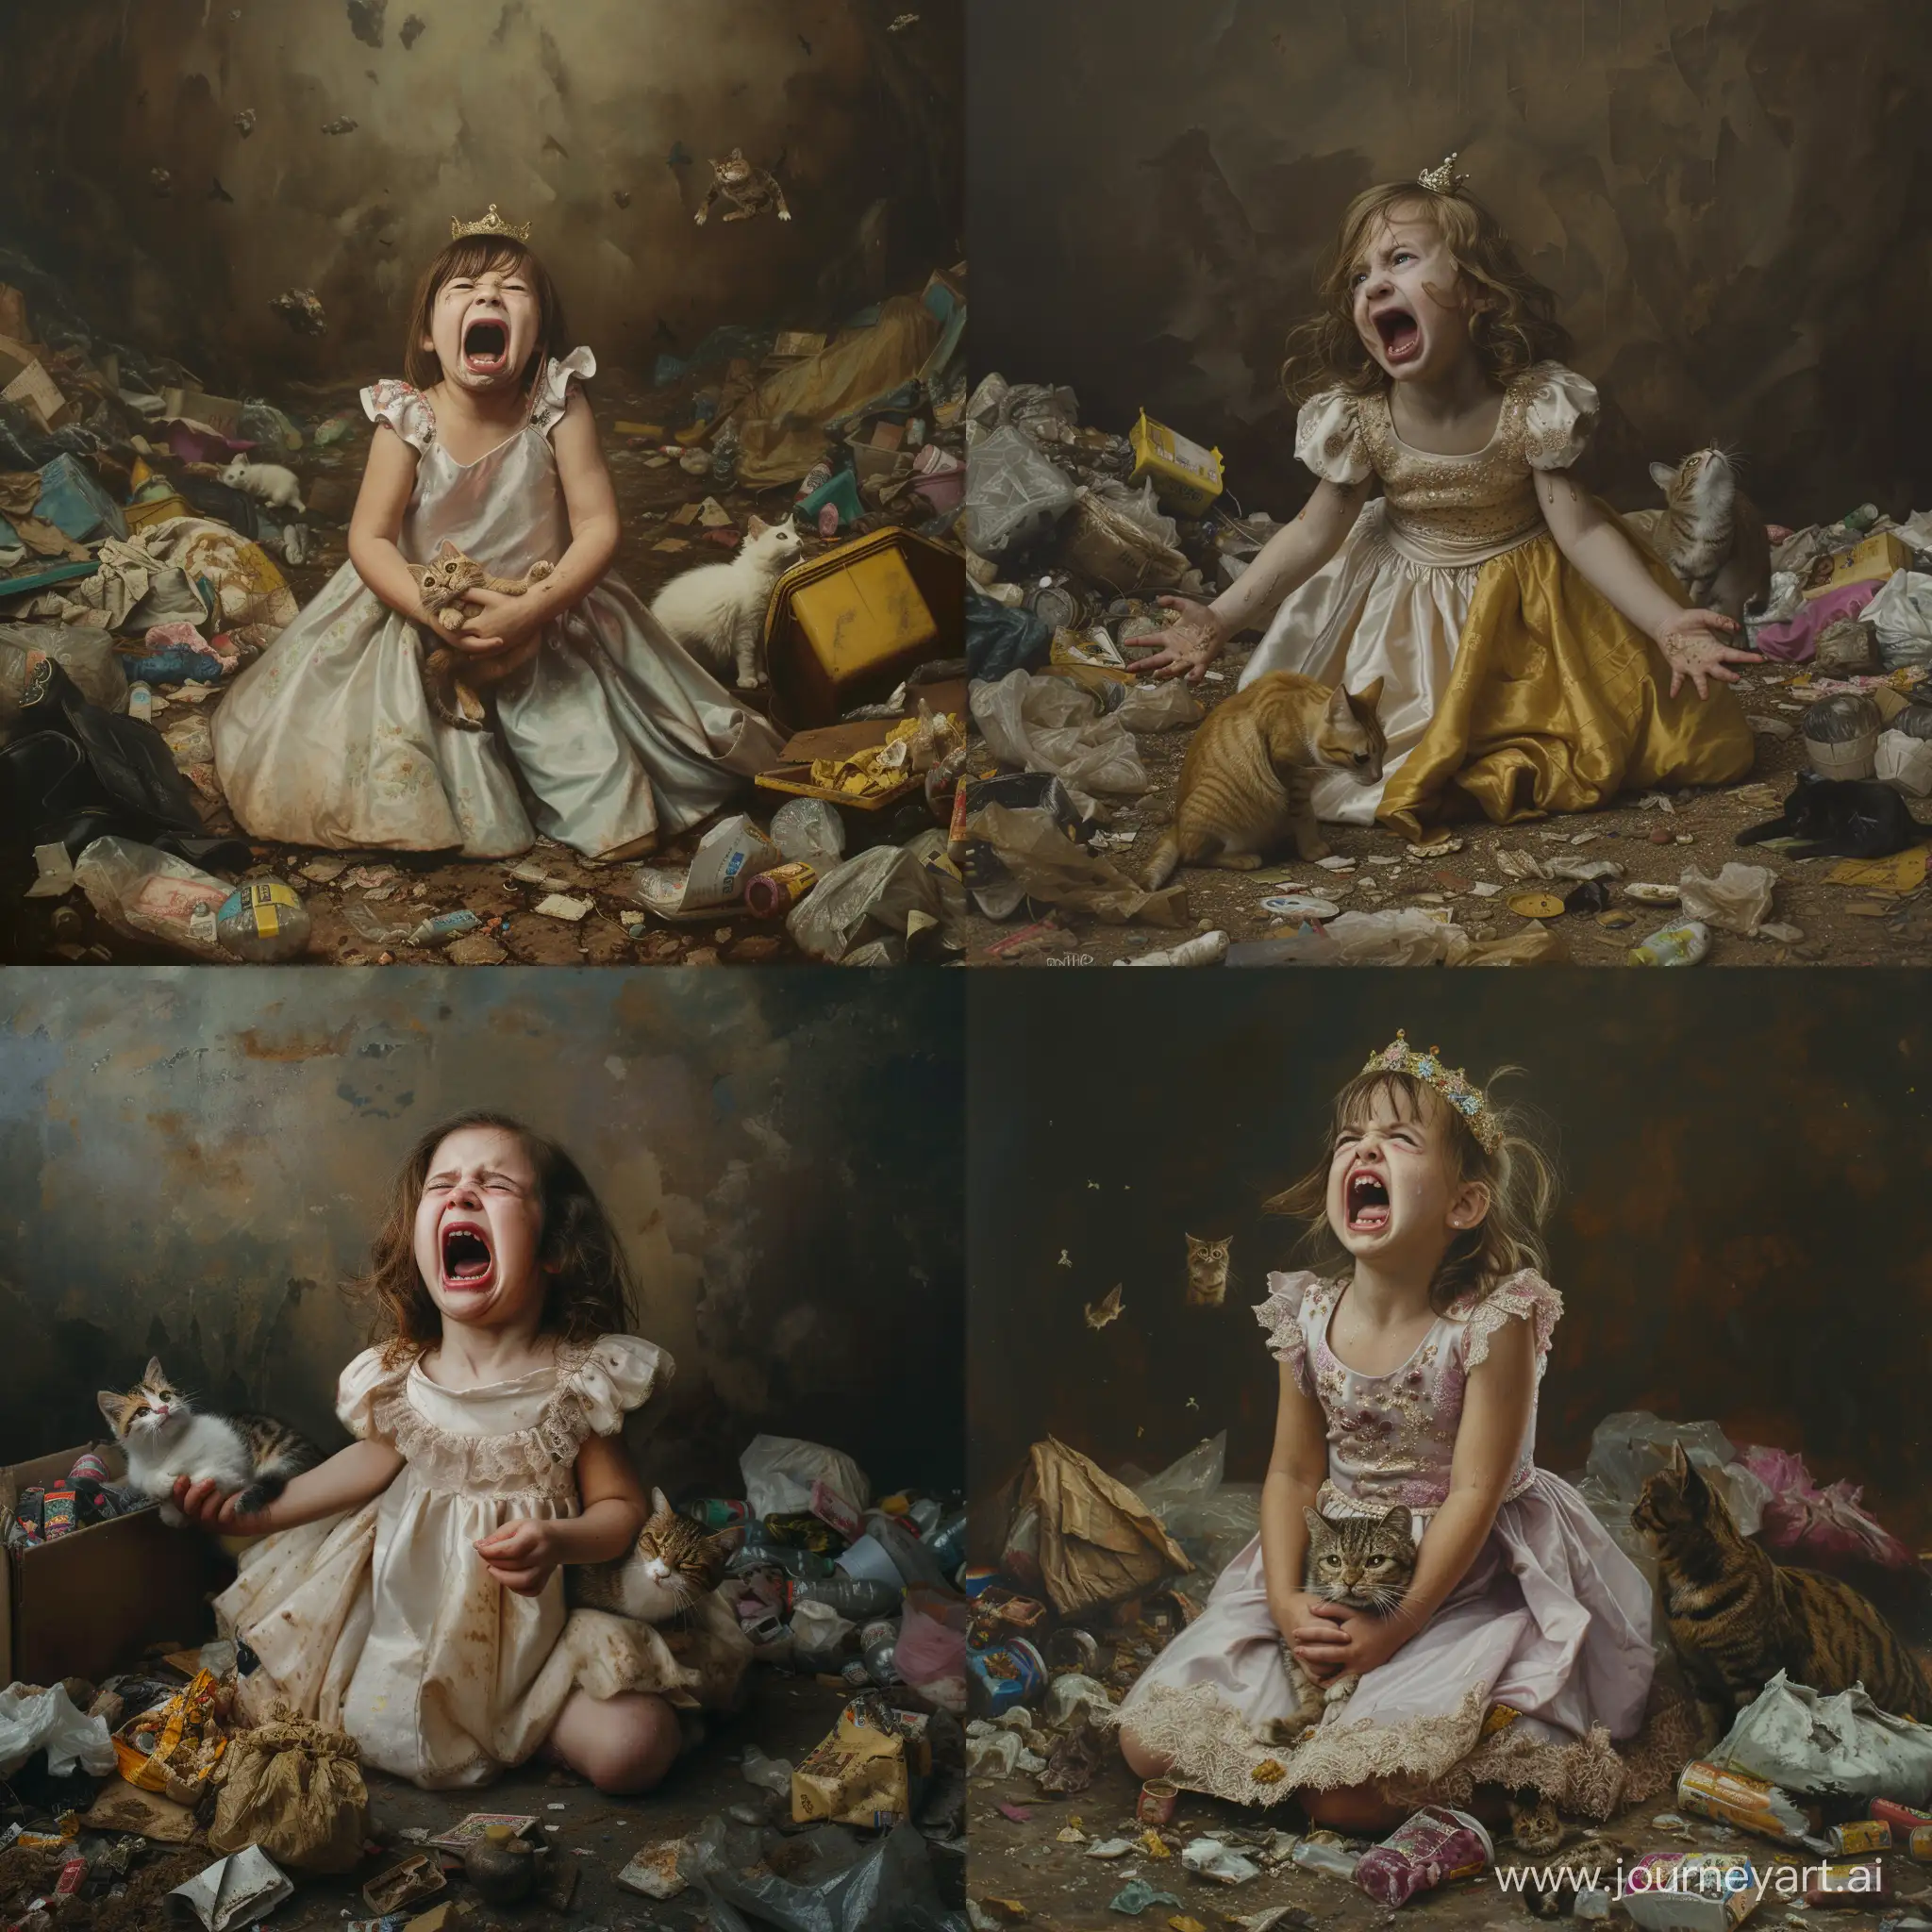 Distressed-10YearOld-Girl-in-Princess-Dress-Holding-Cat-in-Cluttered-Room